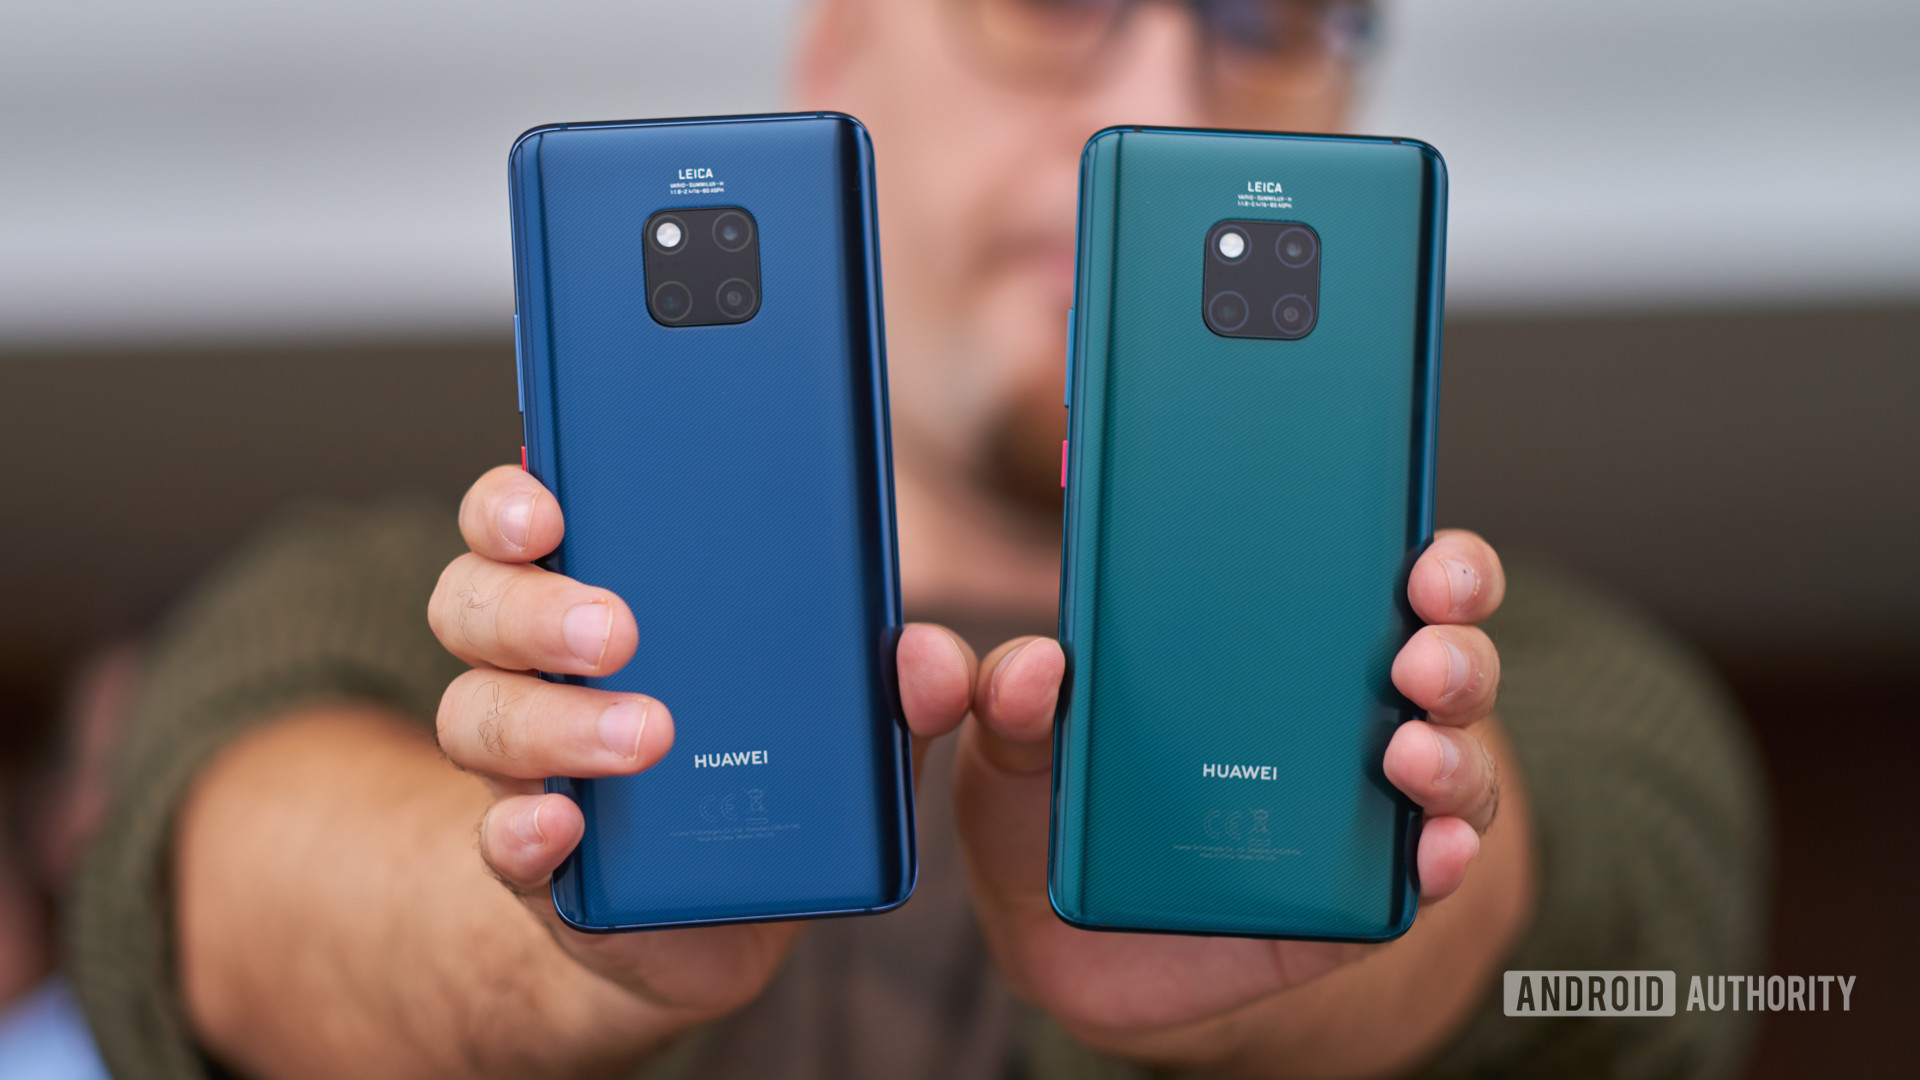 Huawei Mate 20 Pro review: The best phone for power users